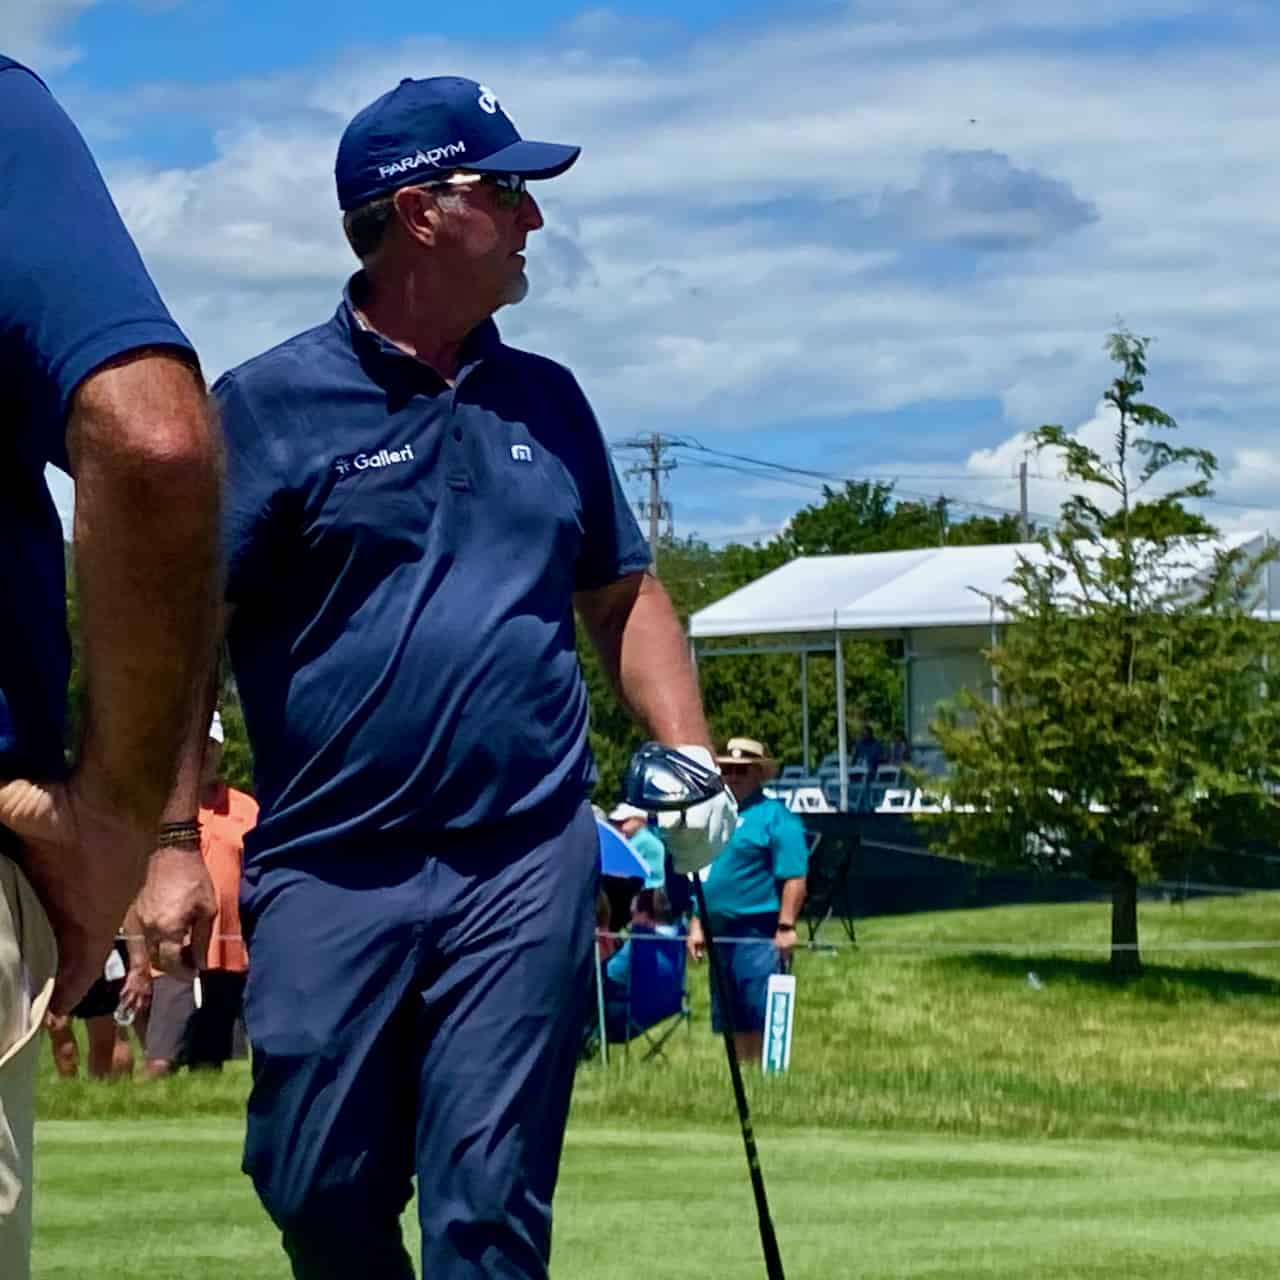 David Duval showing carrying his driver off the tee box in June 2023.